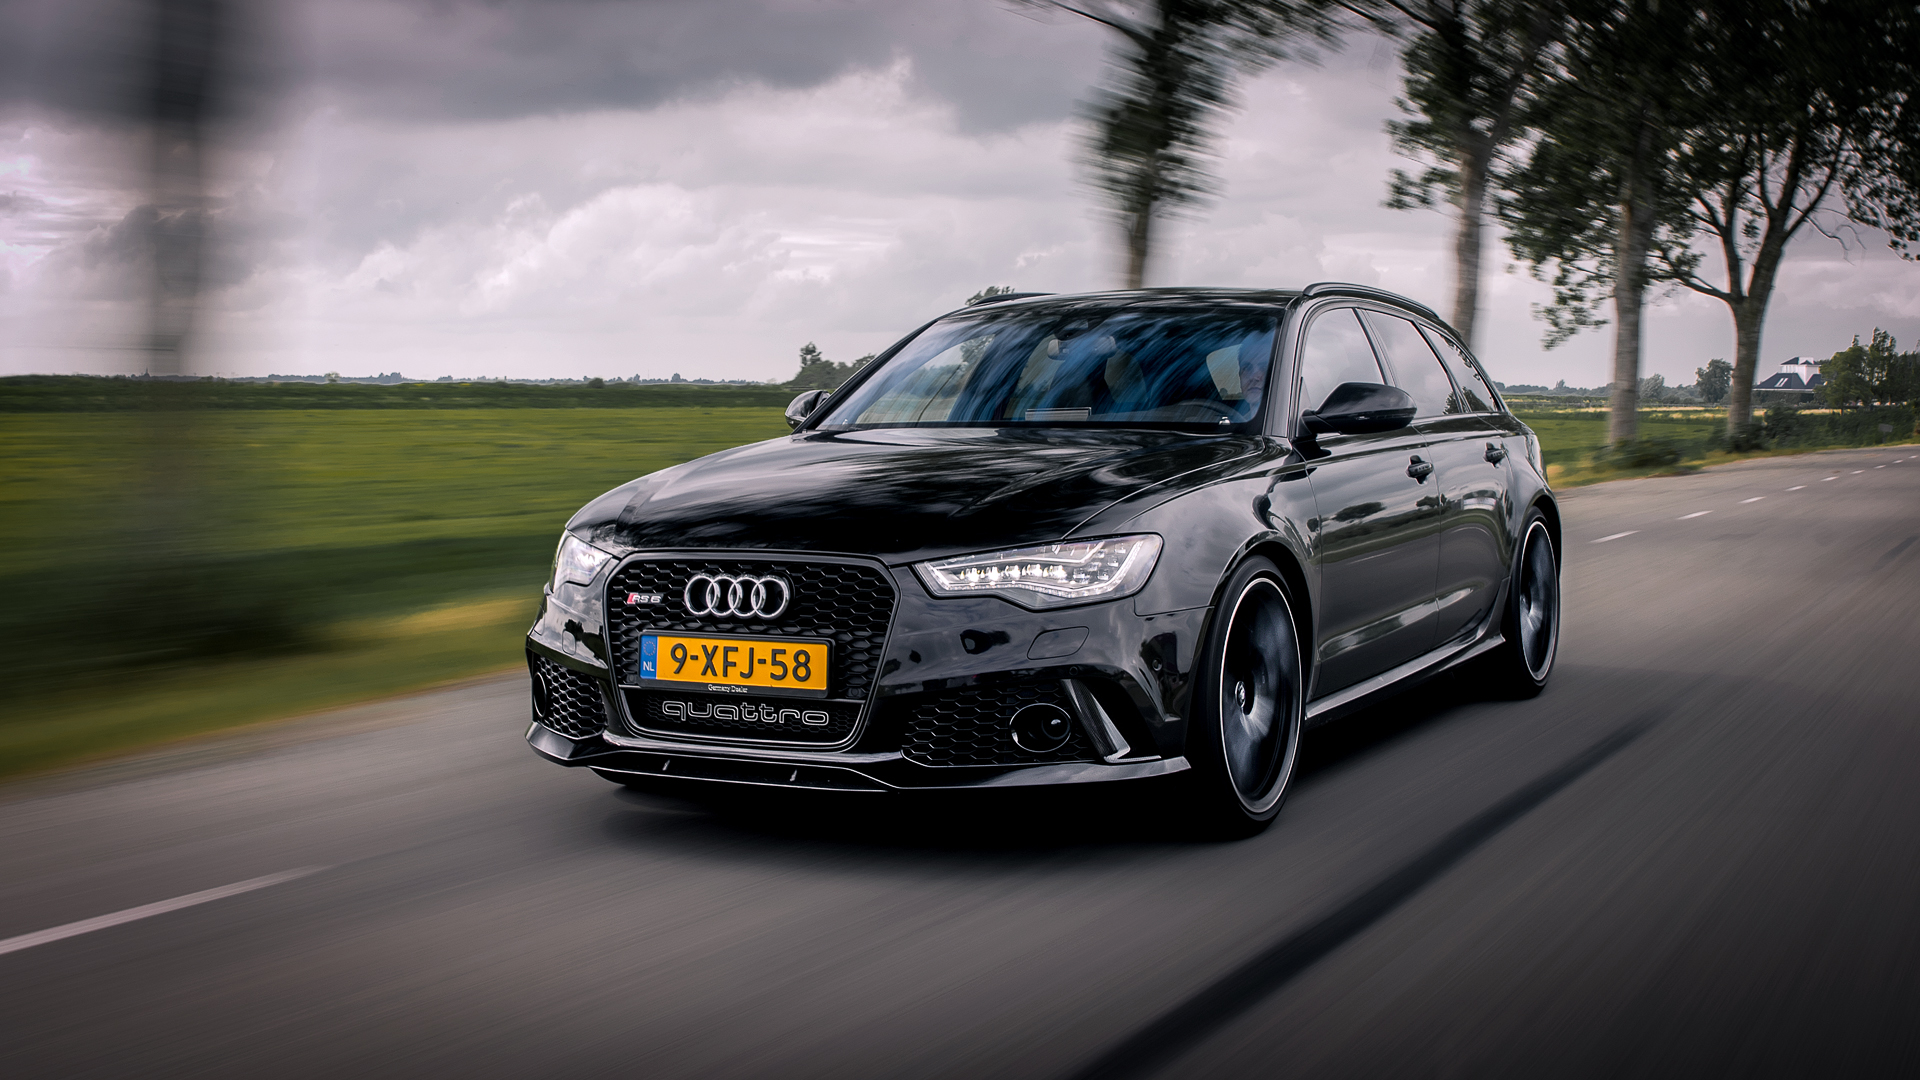 Free Download Audi Rs6 Hd Wallpaper In This Post Will Get Top 5 Best 1920x1080 For Your Desktop Mobile Tablet Explore 100 Audi Rs6 Wallpapers Audi Rs6 Wallpaper Audi Rs6 Wallpapers Audi